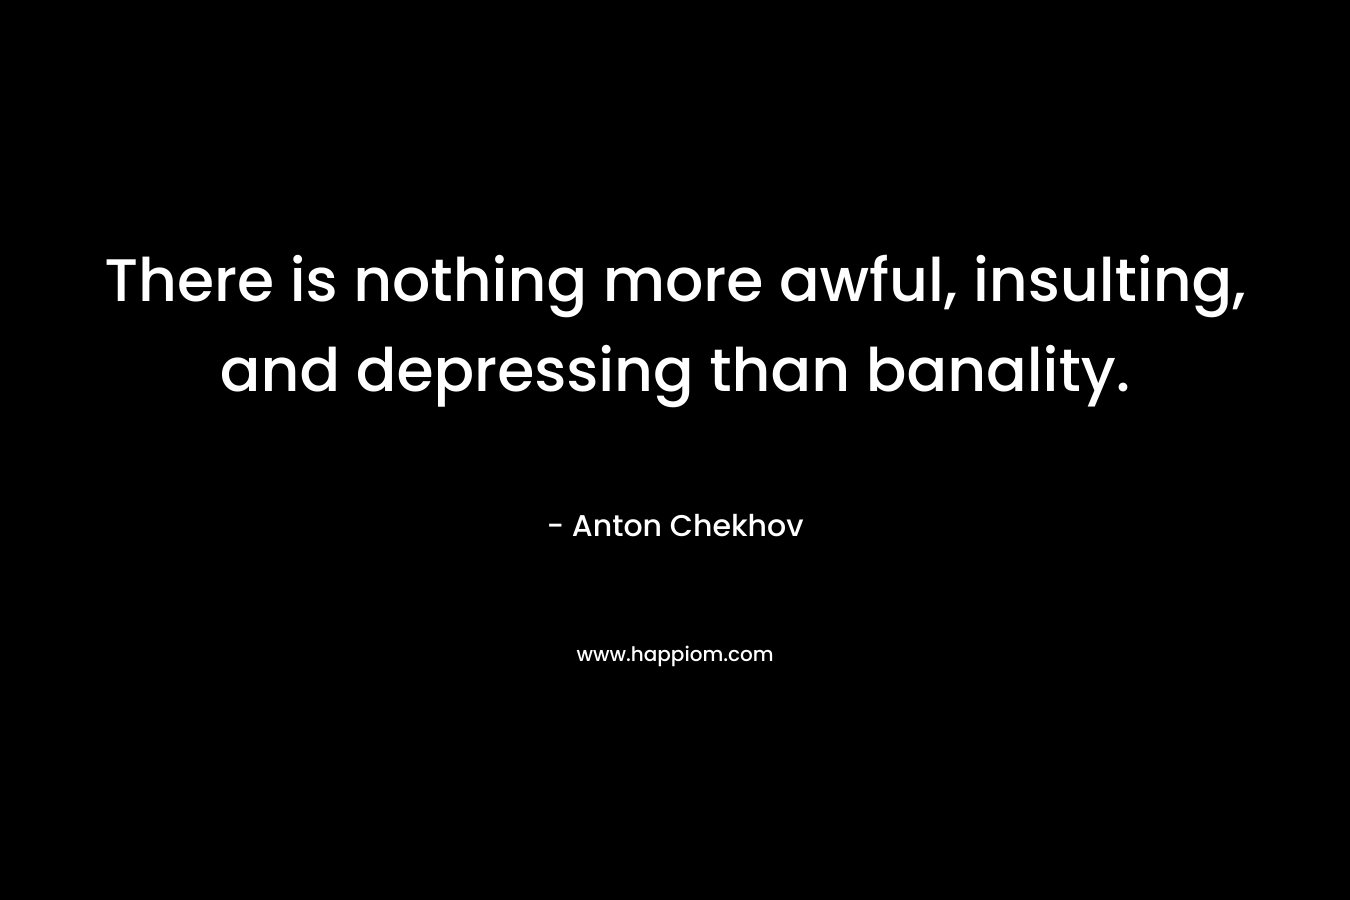 There is nothing more awful, insulting, and depressing than banality. – Anton Chekhov